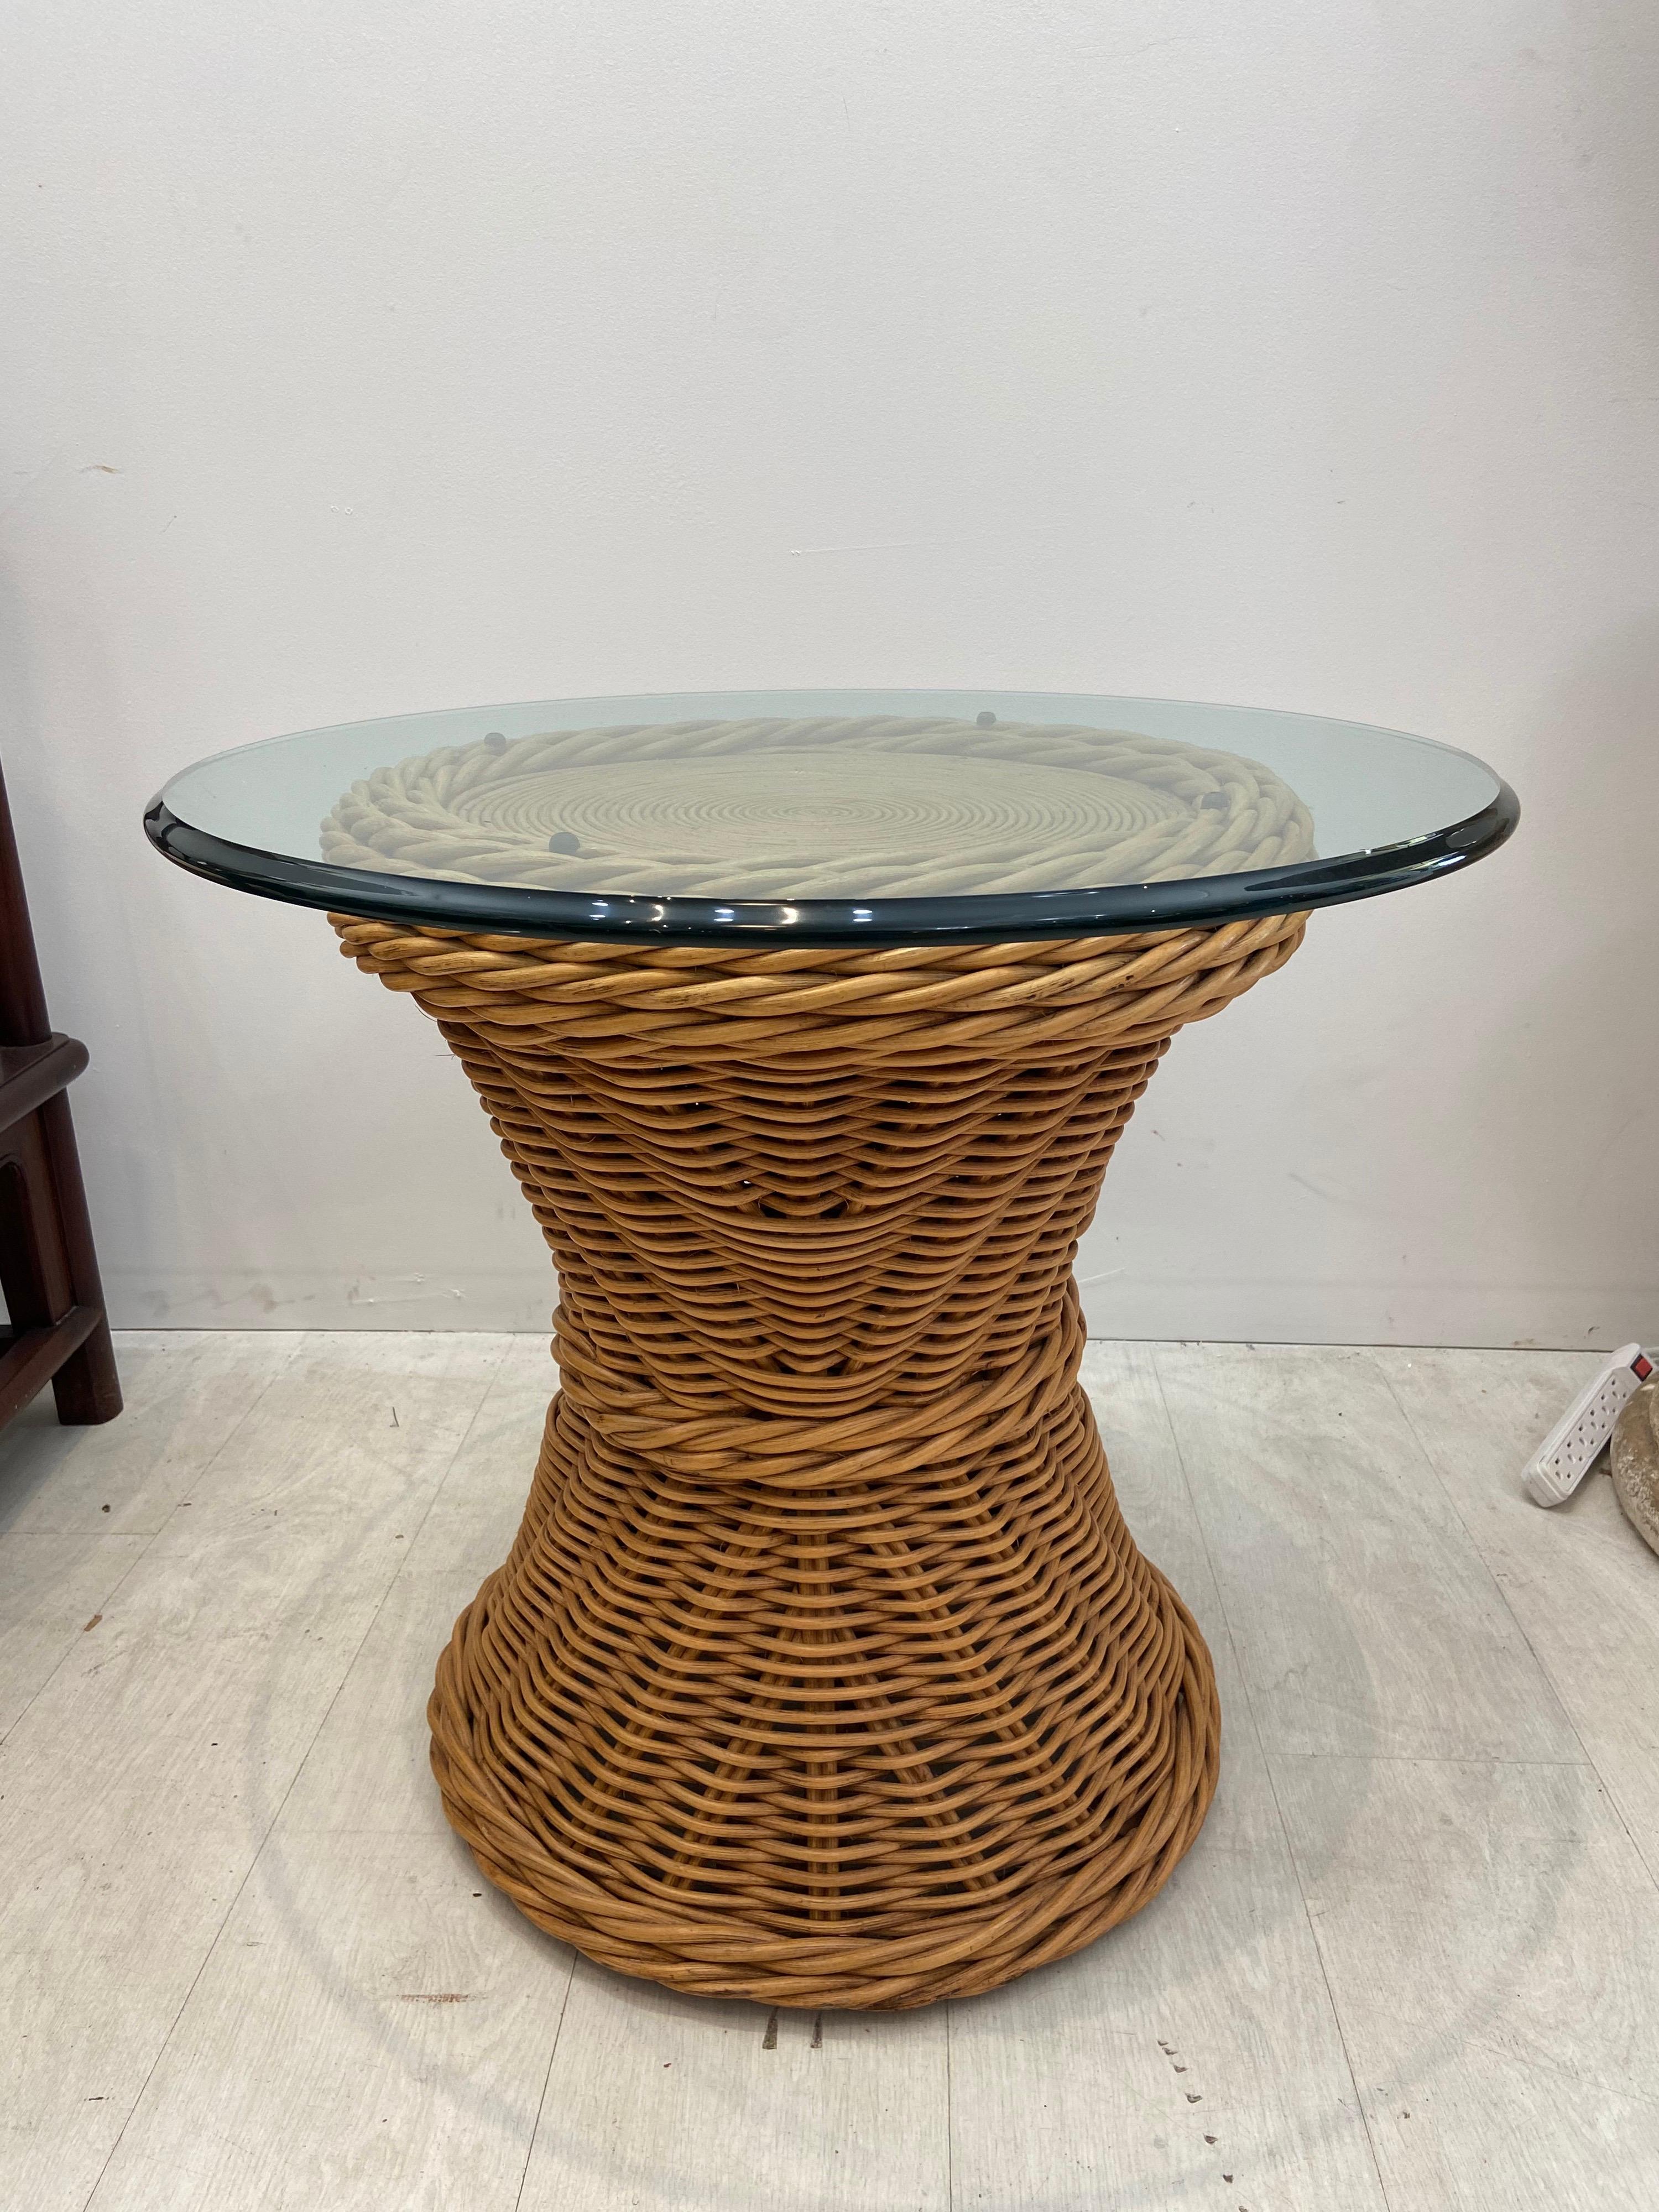 High quality rattan table with pencil reed circular pattern top. Hourglass shape with a very strong design. Three-quarter inch glass top has a few scratches. Measures: 26 inch diameter top by 23 1/2 inches tall